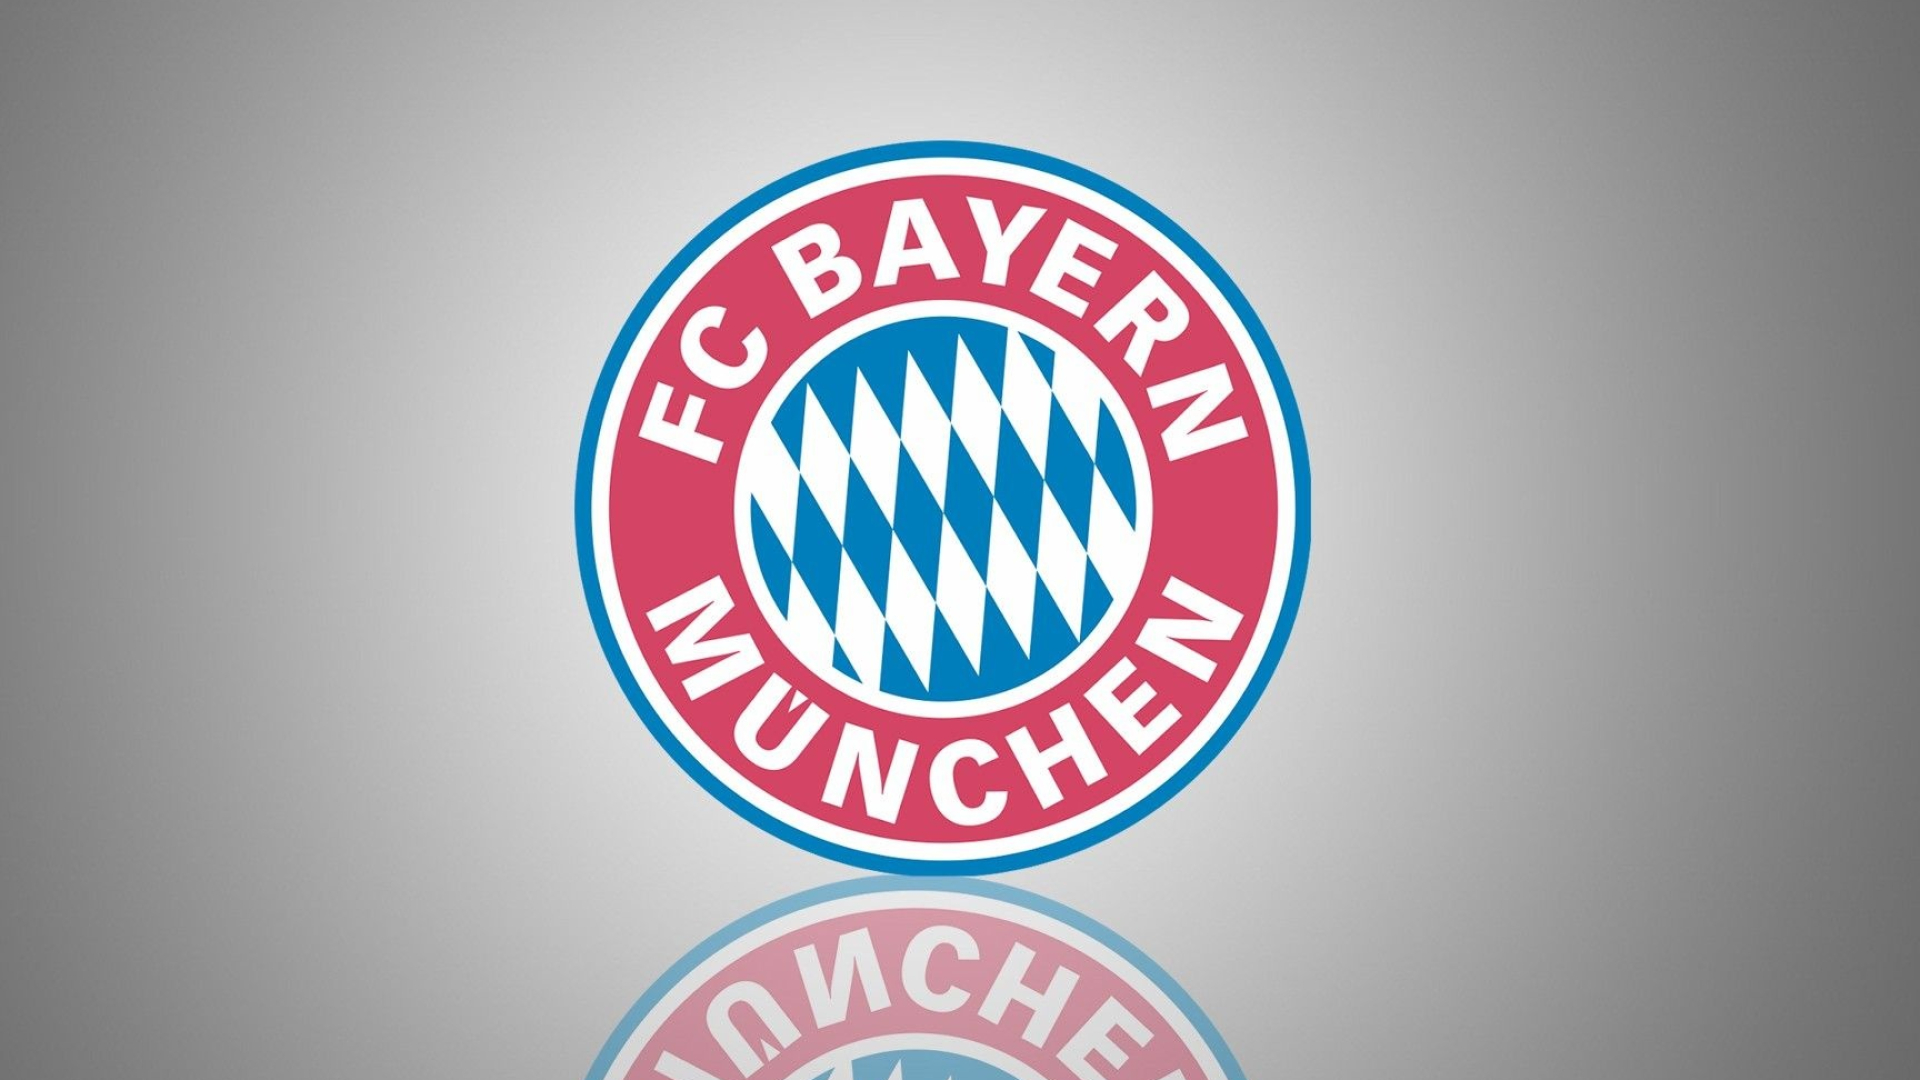 Bayern Munchen FC: The football team, playing in the Allianz Arena, has the most supporters in all of Germany. 1920x1080 Full HD Background.